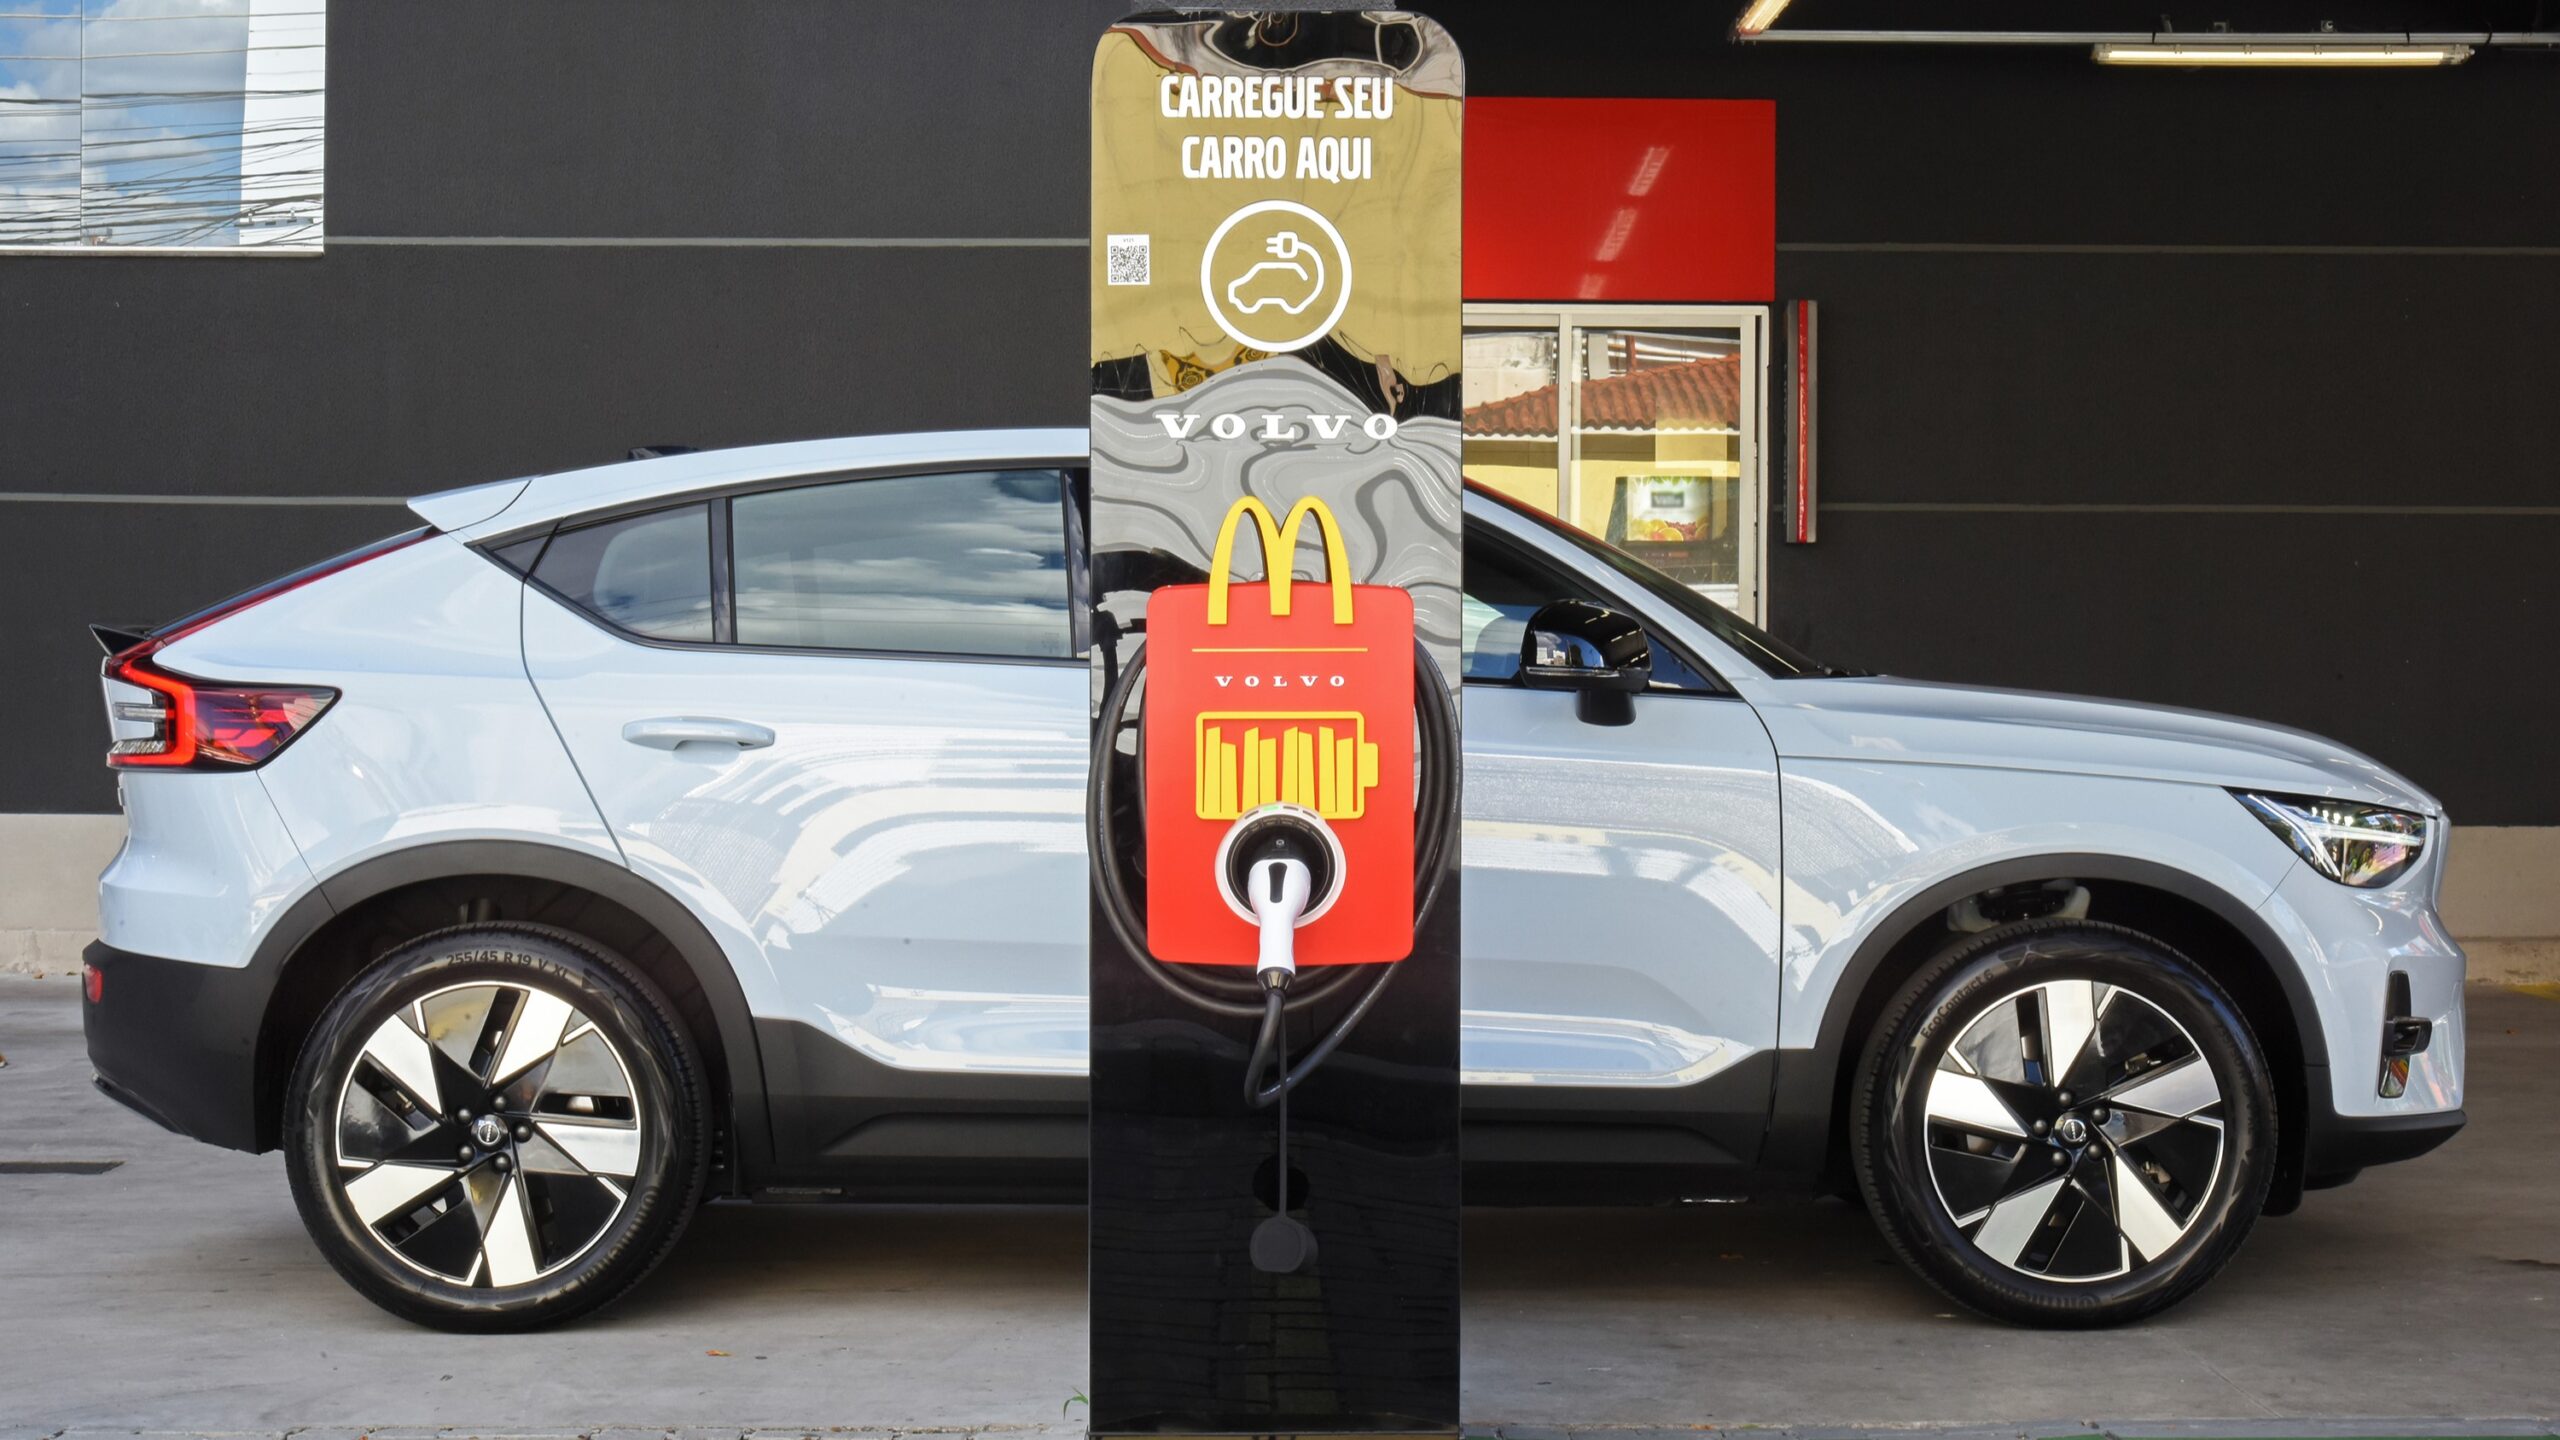 In partnership with Volvo Car Brazil, we have installed new electric vehicle charging points at our restaurants